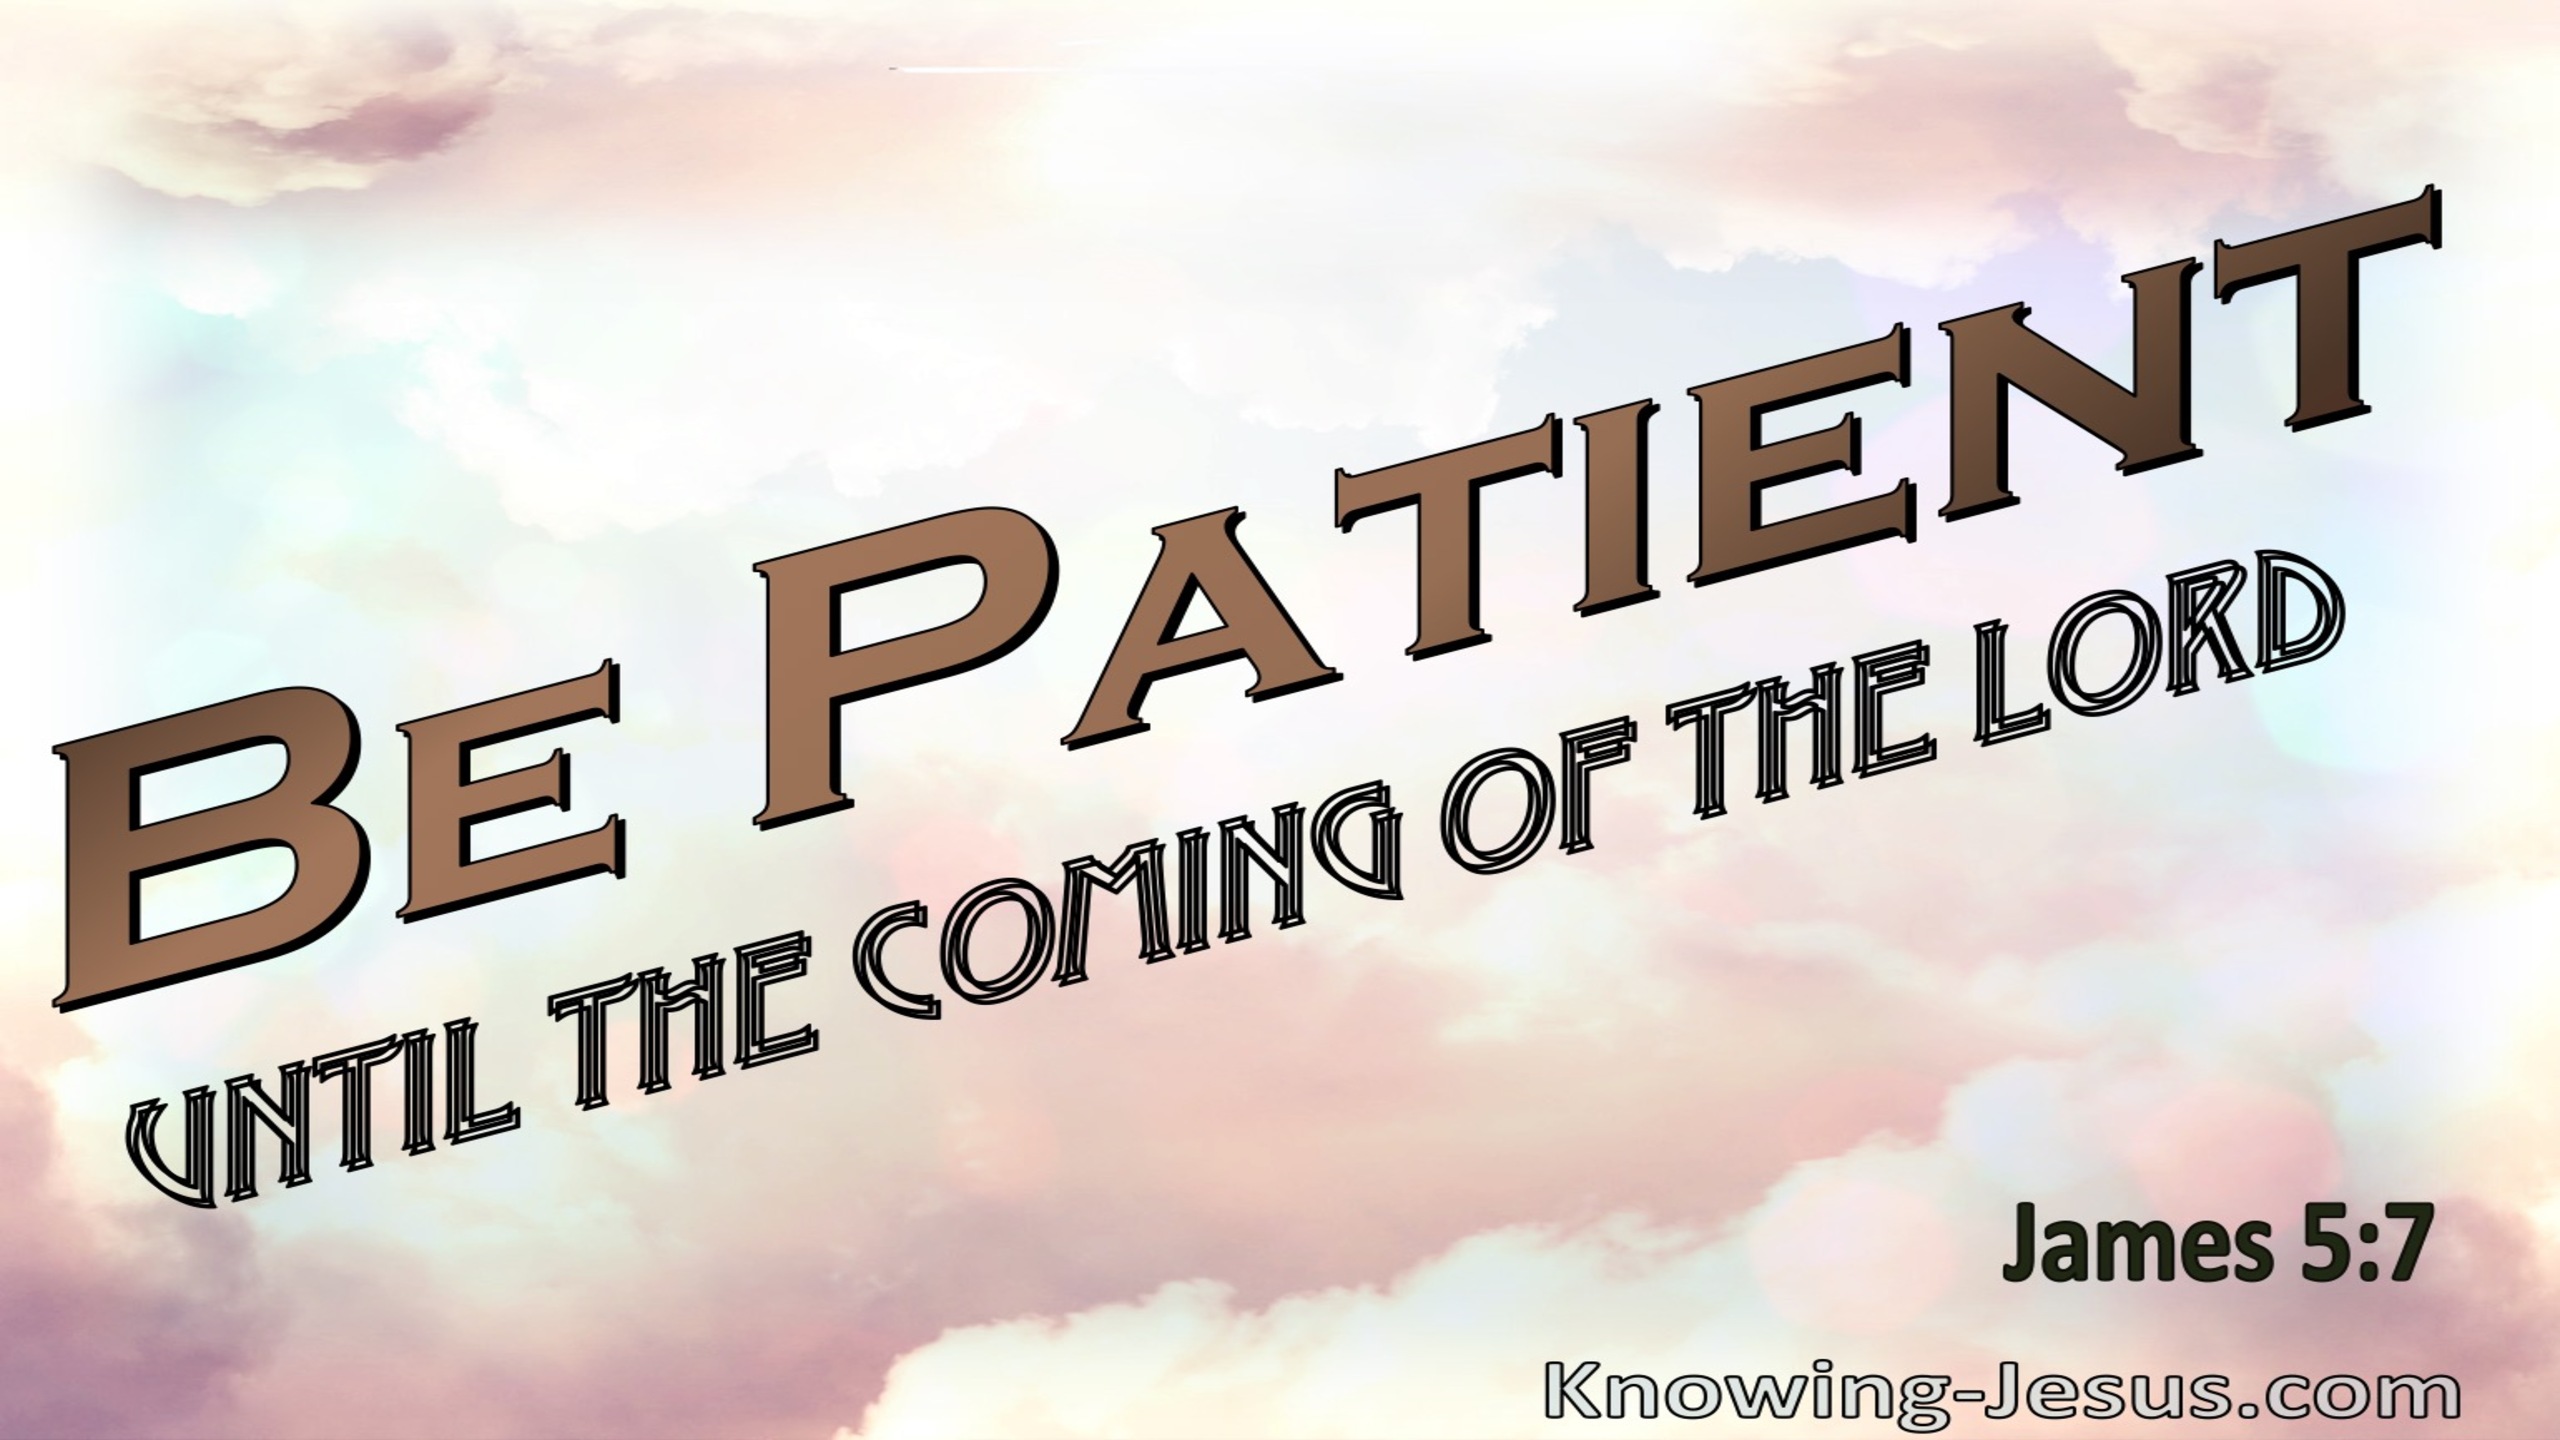 James 5:7 Be Patient Until The Coming Of The Lord (pink)